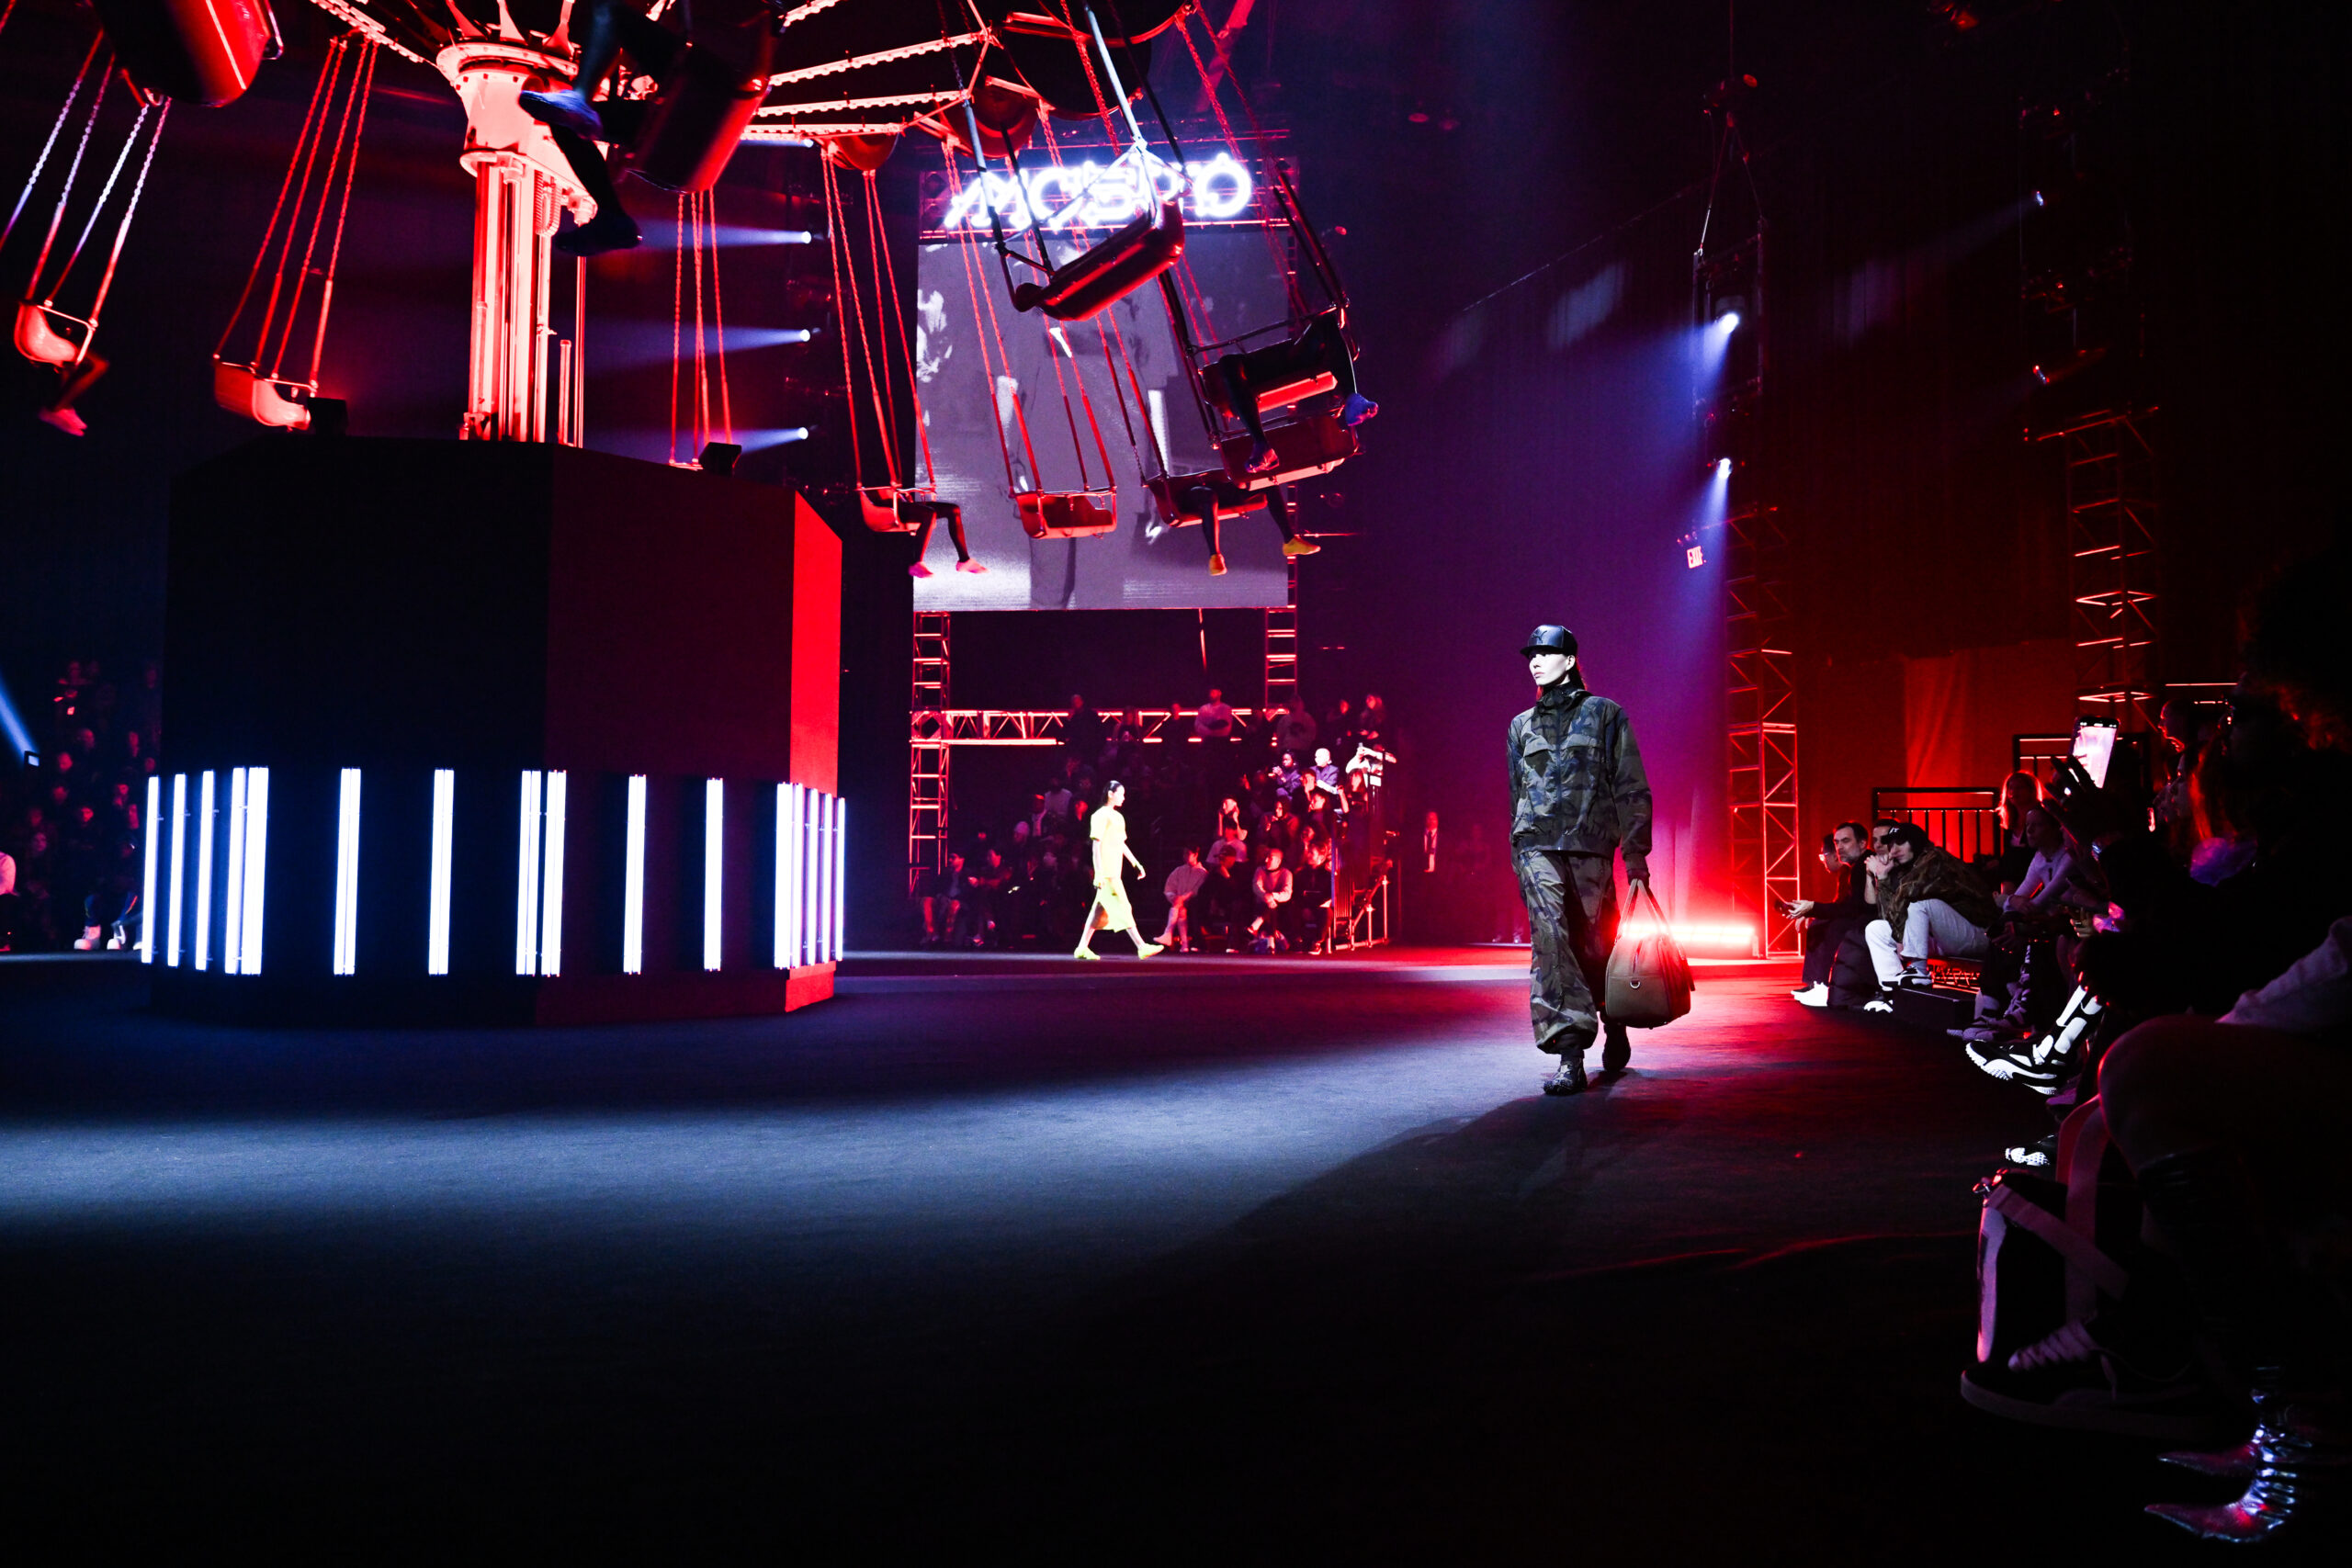 A dynamic fashion show scene with models walking the runway under vibrant red lights, featuring a setup titled "WELCOME TO THE AMAZING MOSTRO SHOW" presented by PUMA.